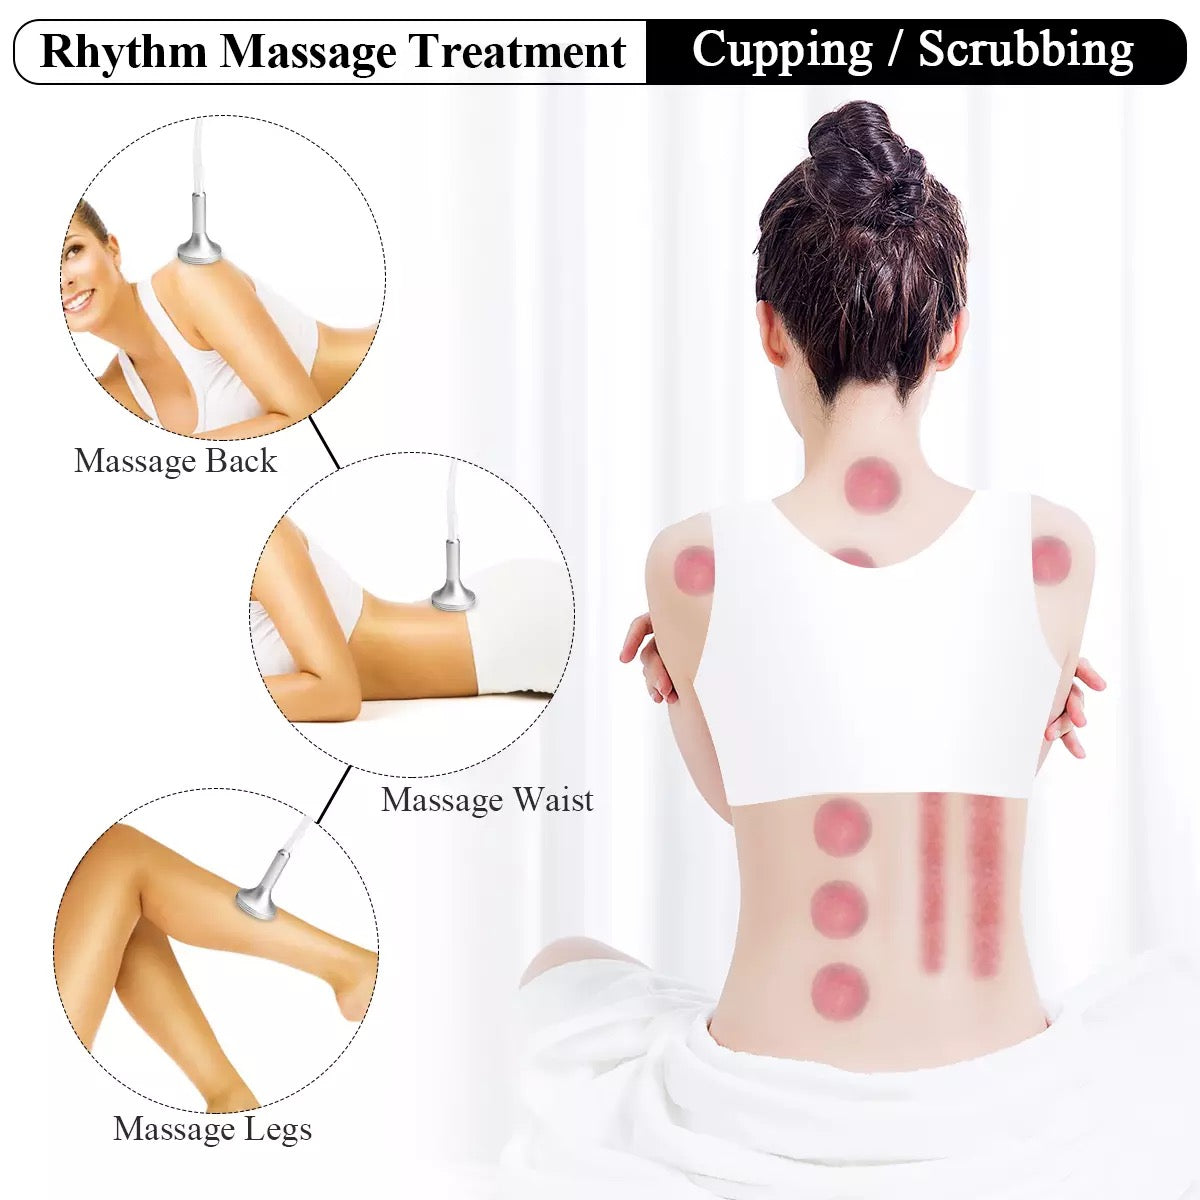 Vacuum Therapy Machine Rhythm Massage Treatment on Back, Waist and Legs; Cupping and Scrubbing 